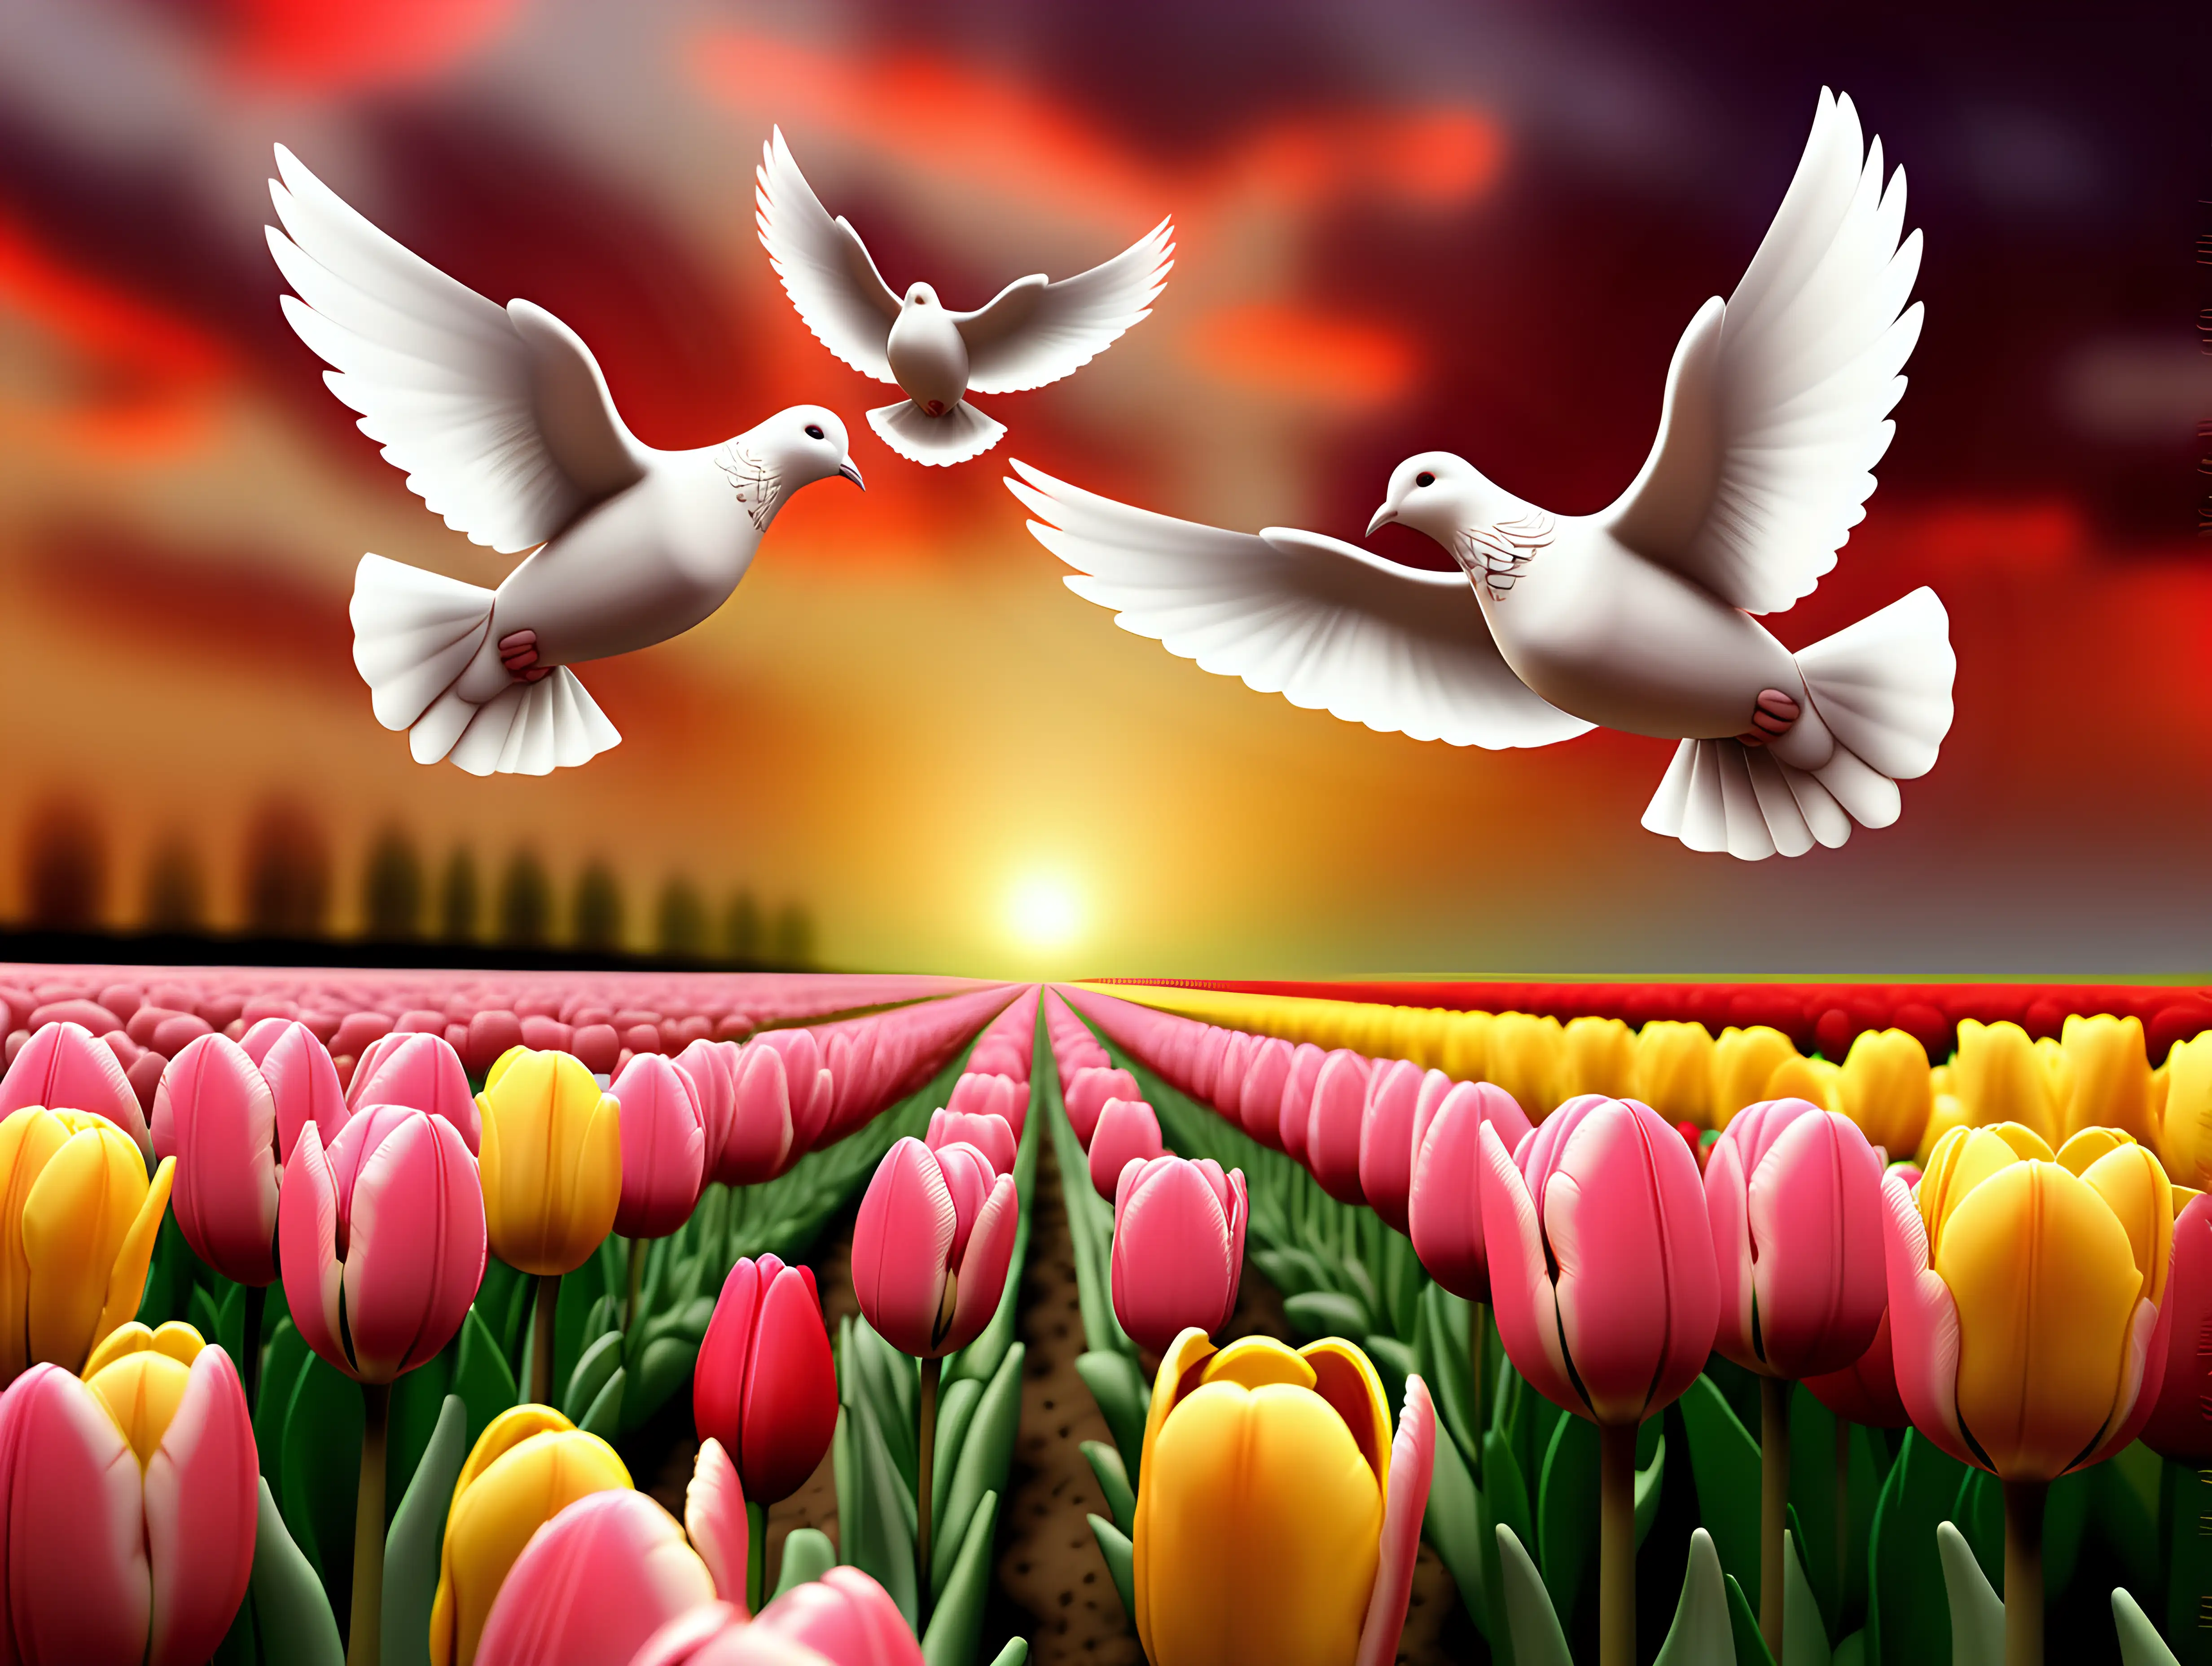 Graceful Doves Soaring Above Vibrant Tulip Fields at Sunset